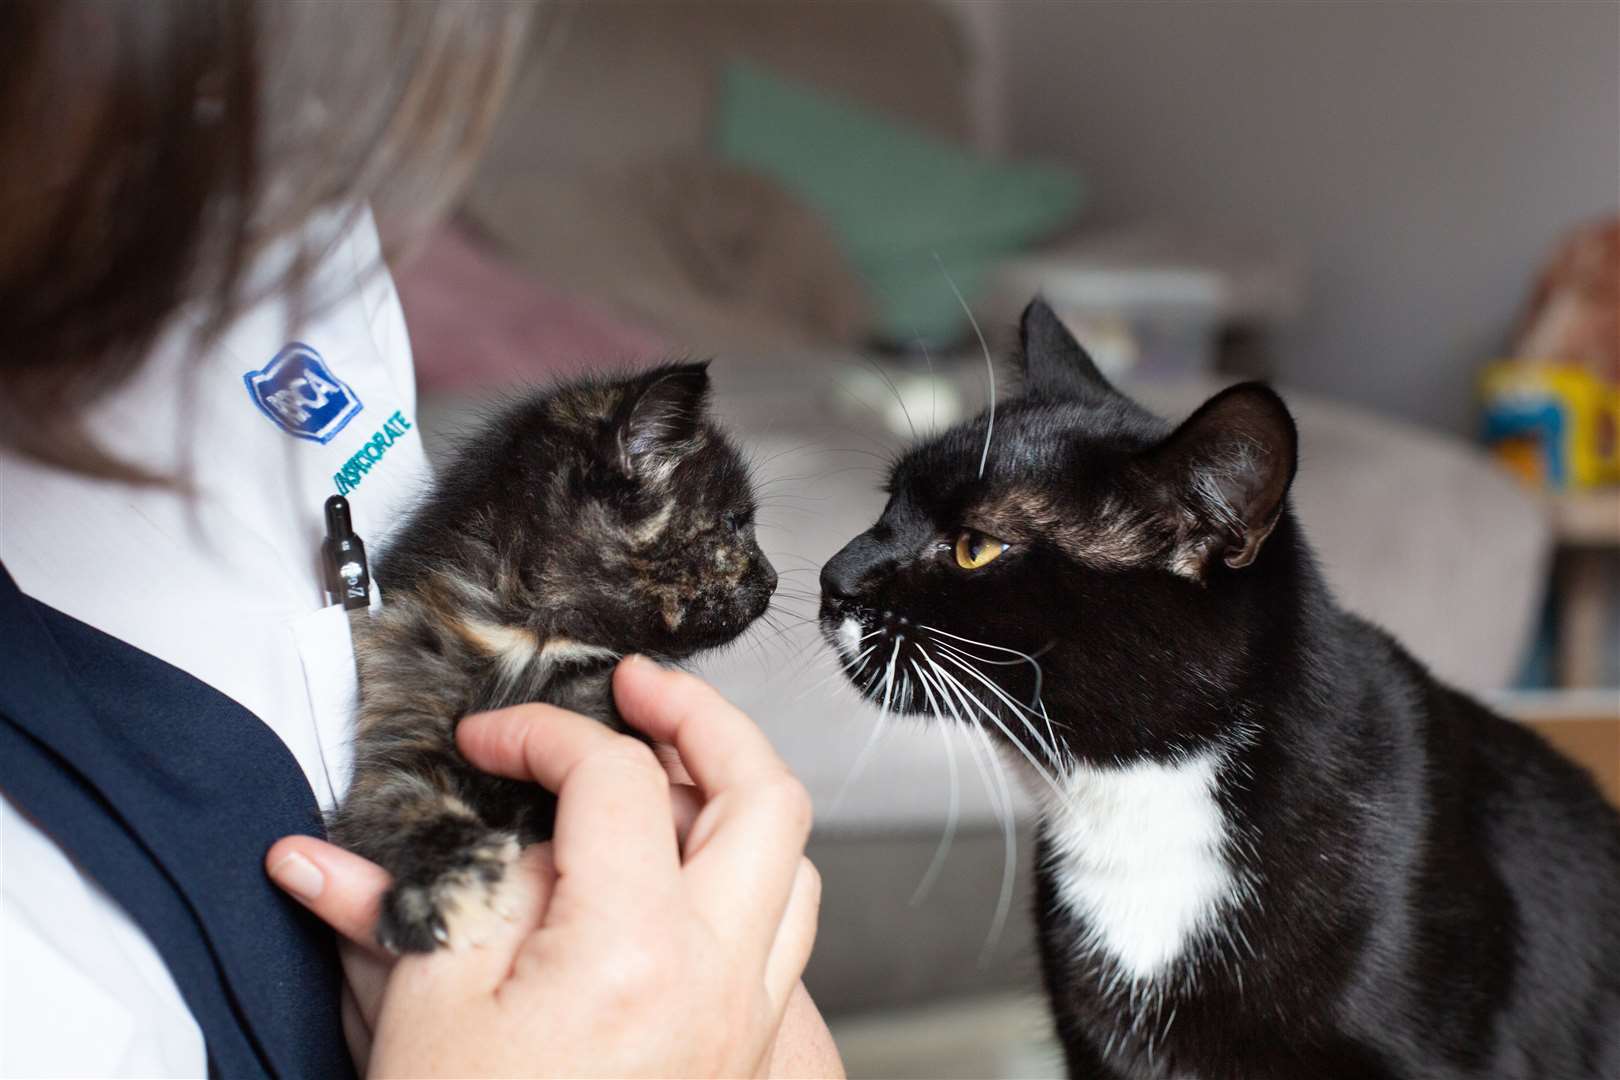 The RSPCA rescues and rehomes thousands of animals each year